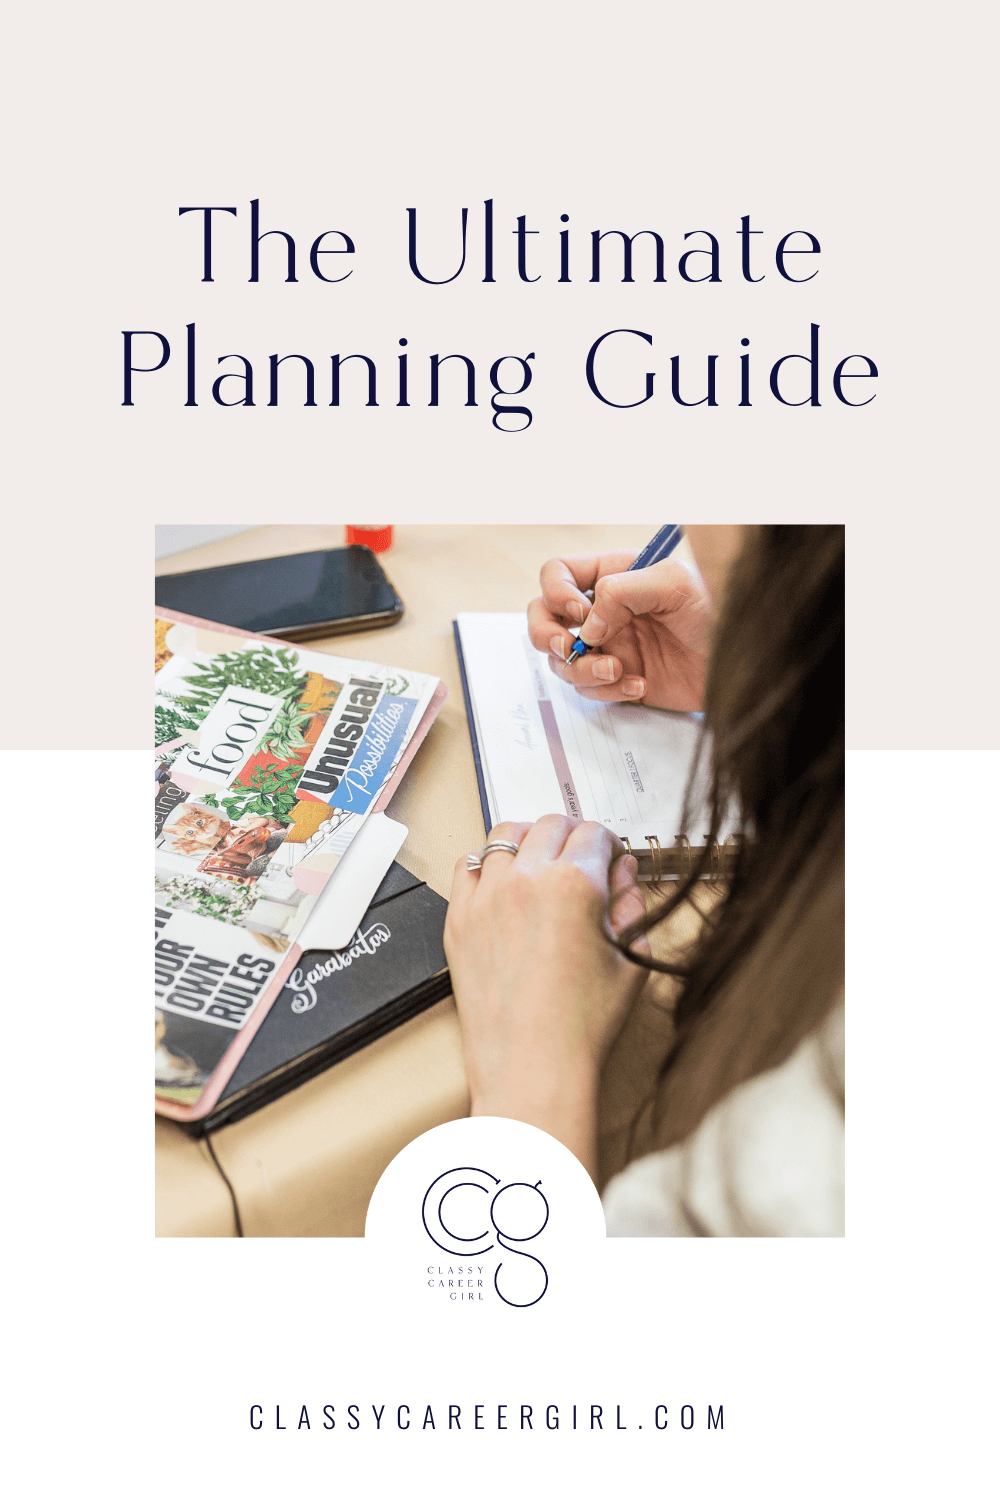 The Ultimate Planning Guide